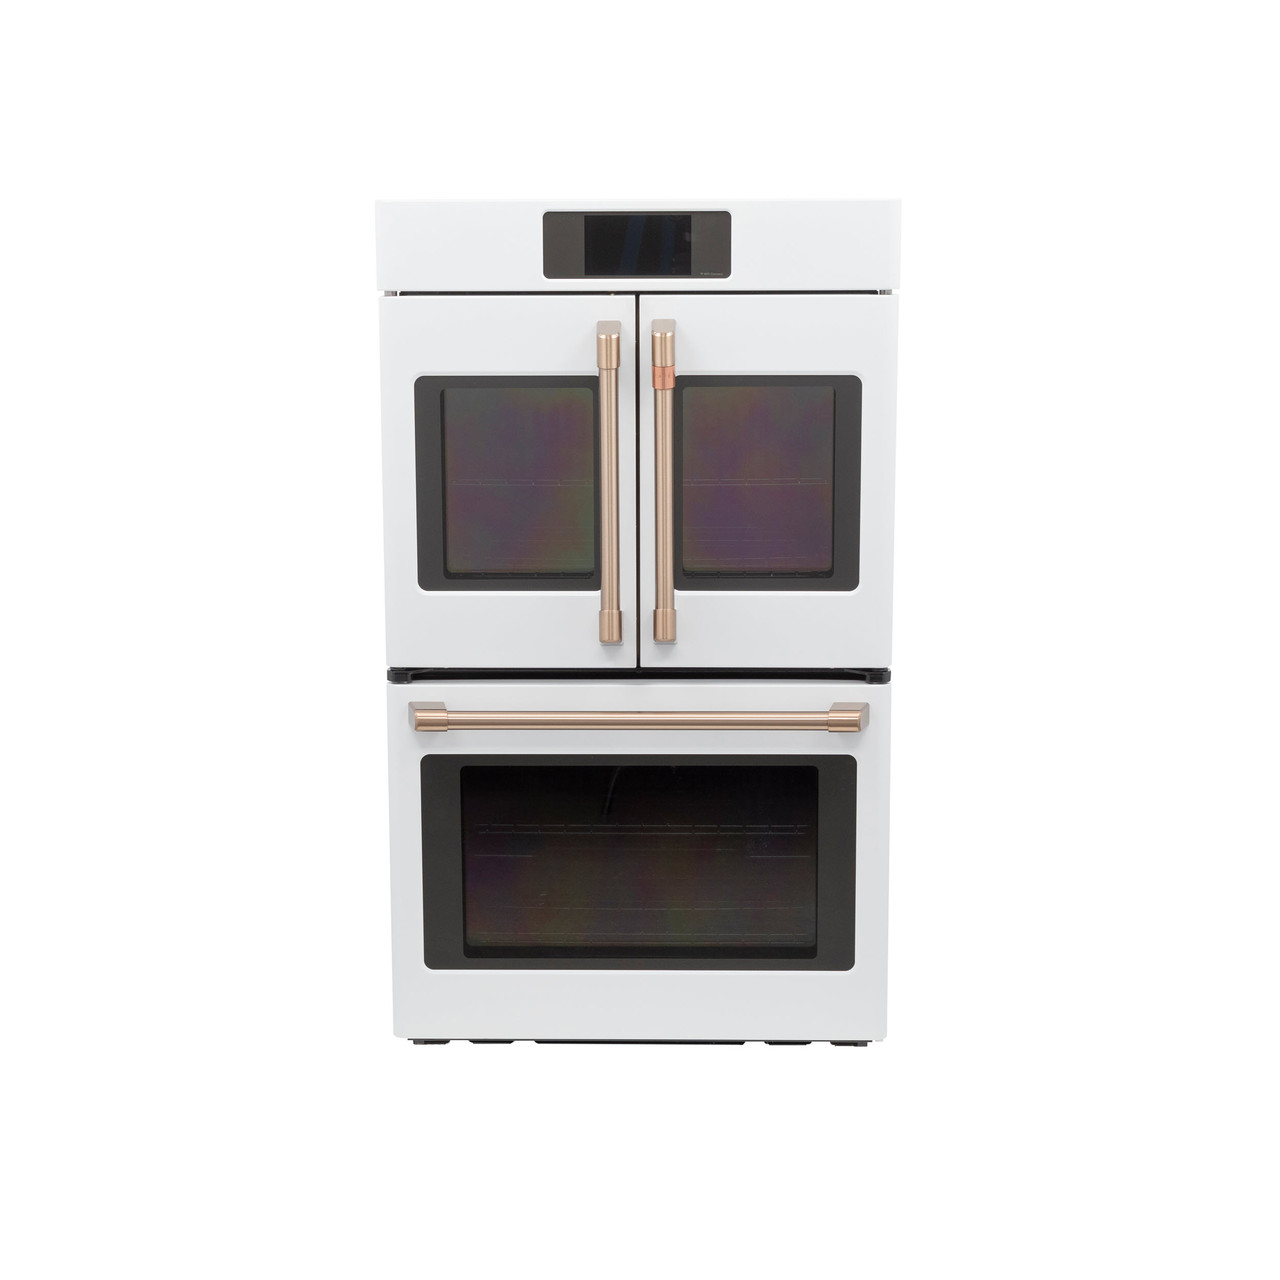 Review: Cafe Professional Series 30 Smart Built In Convection French-Door  Double Wall Oven • Southern Shelle